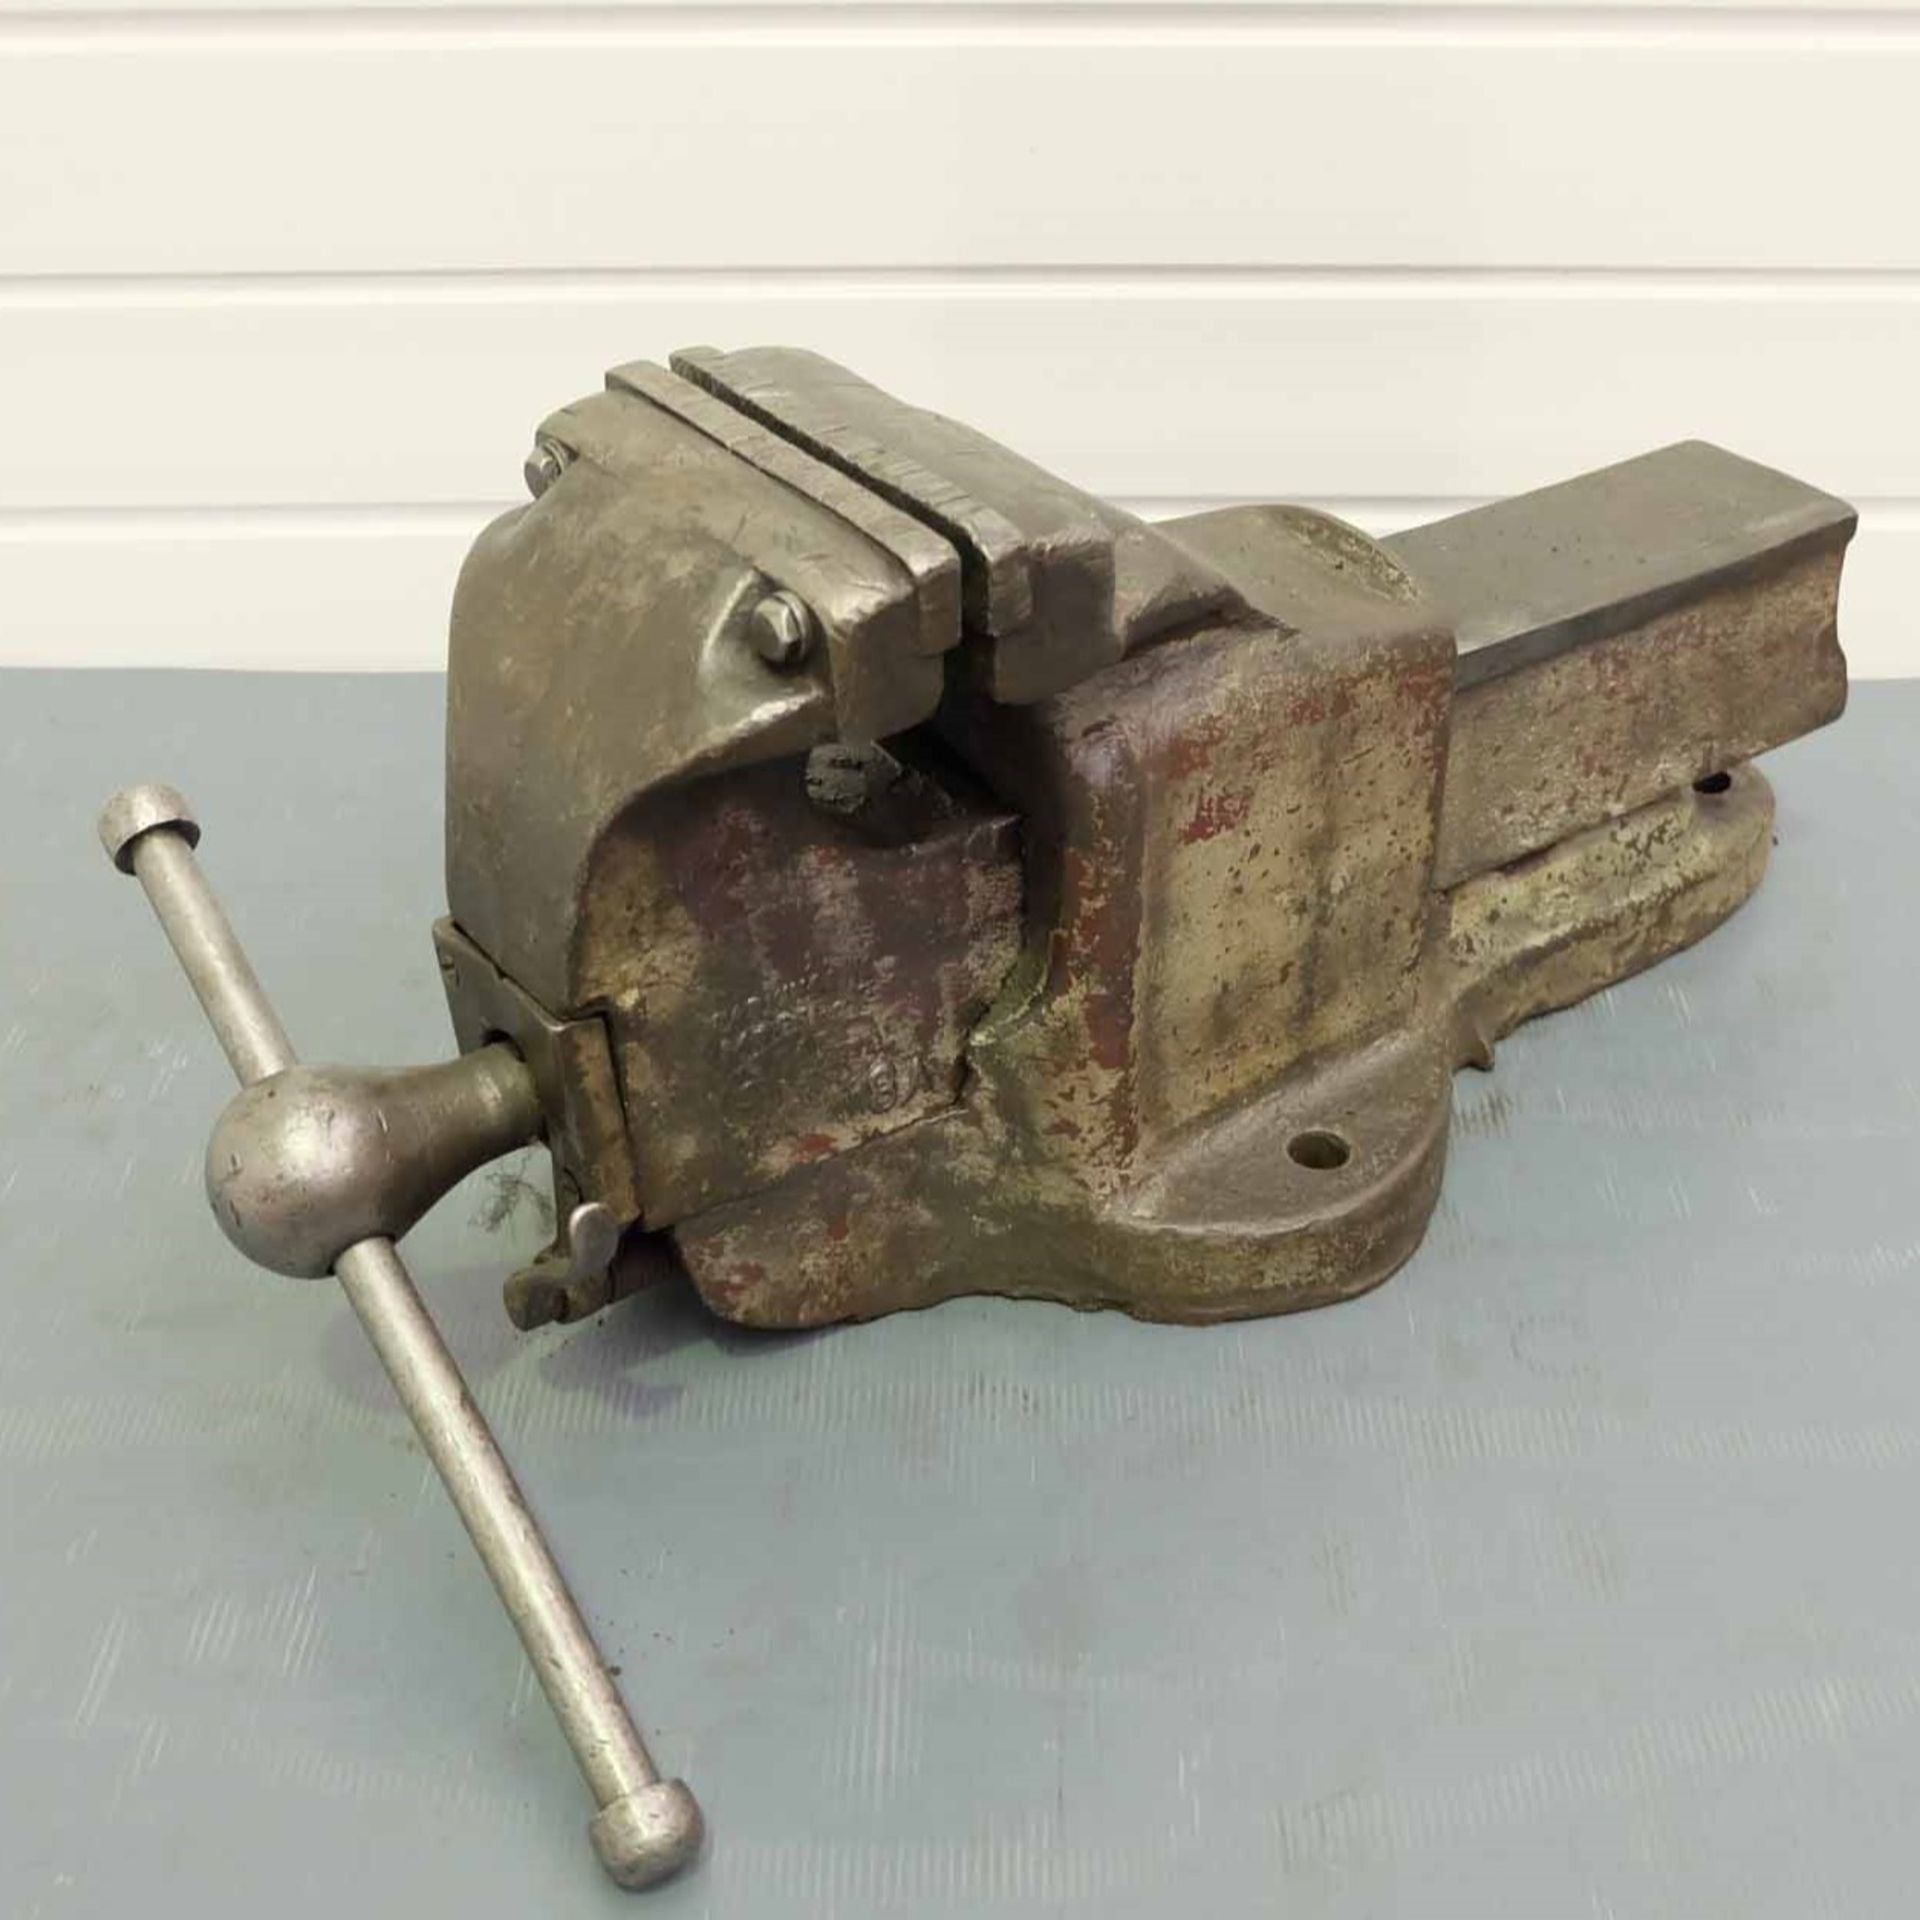 Parkinsons No8A 6" Bench Vice. Jaw Width 6". With Quick Release.